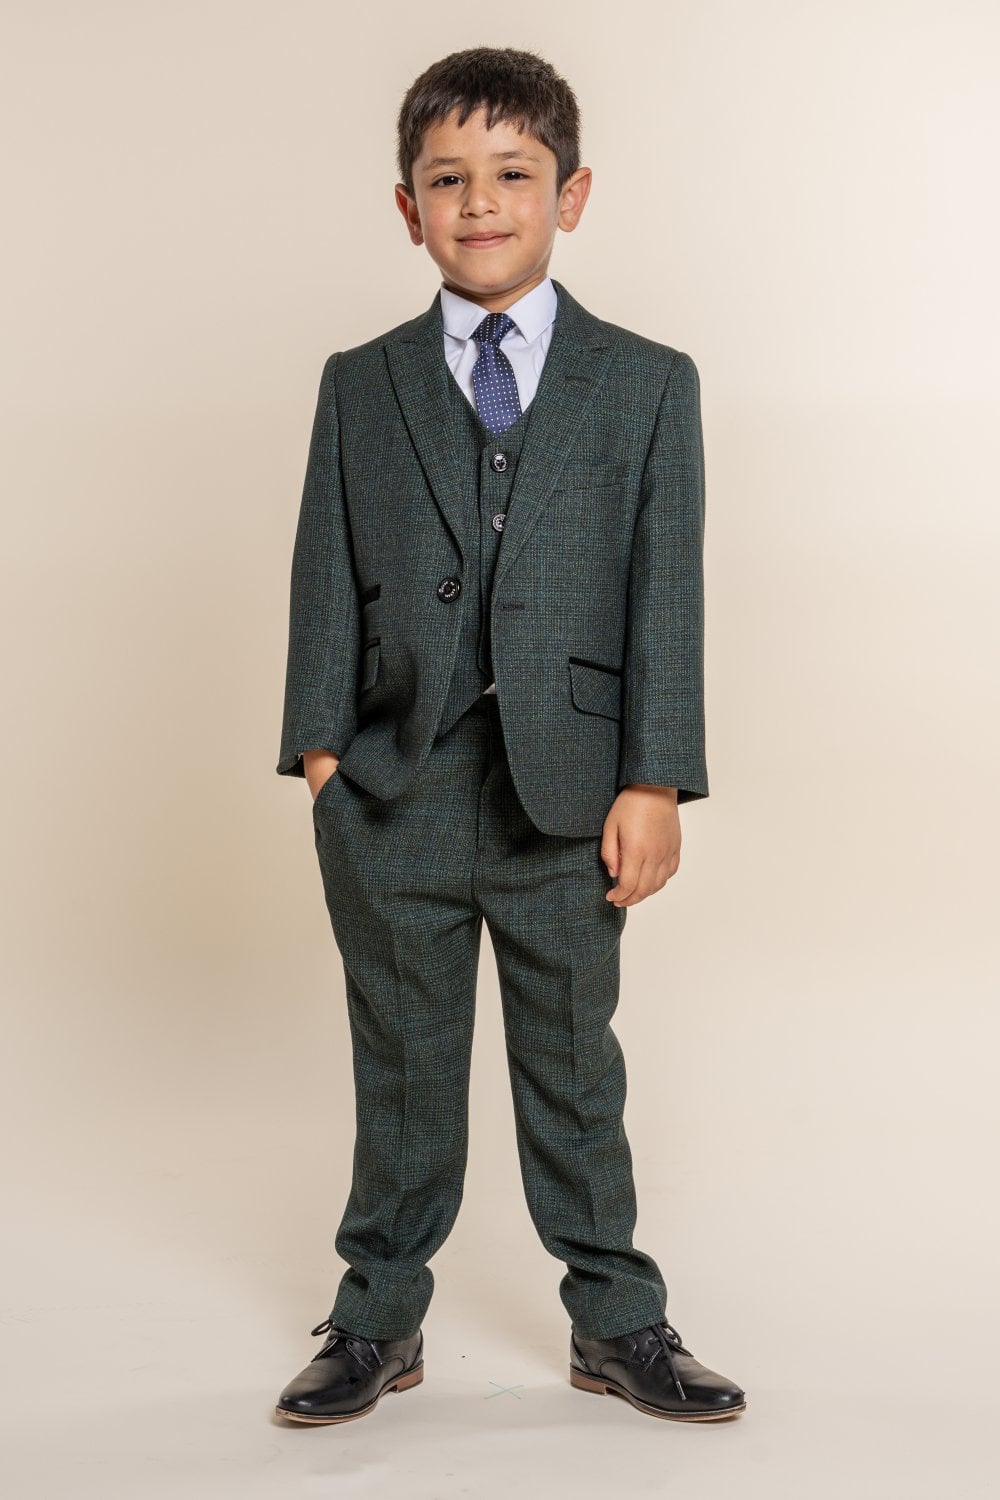 Children's Carnaby Olive - Wedding Suit Hire | Suits For Groom | Groom Hire